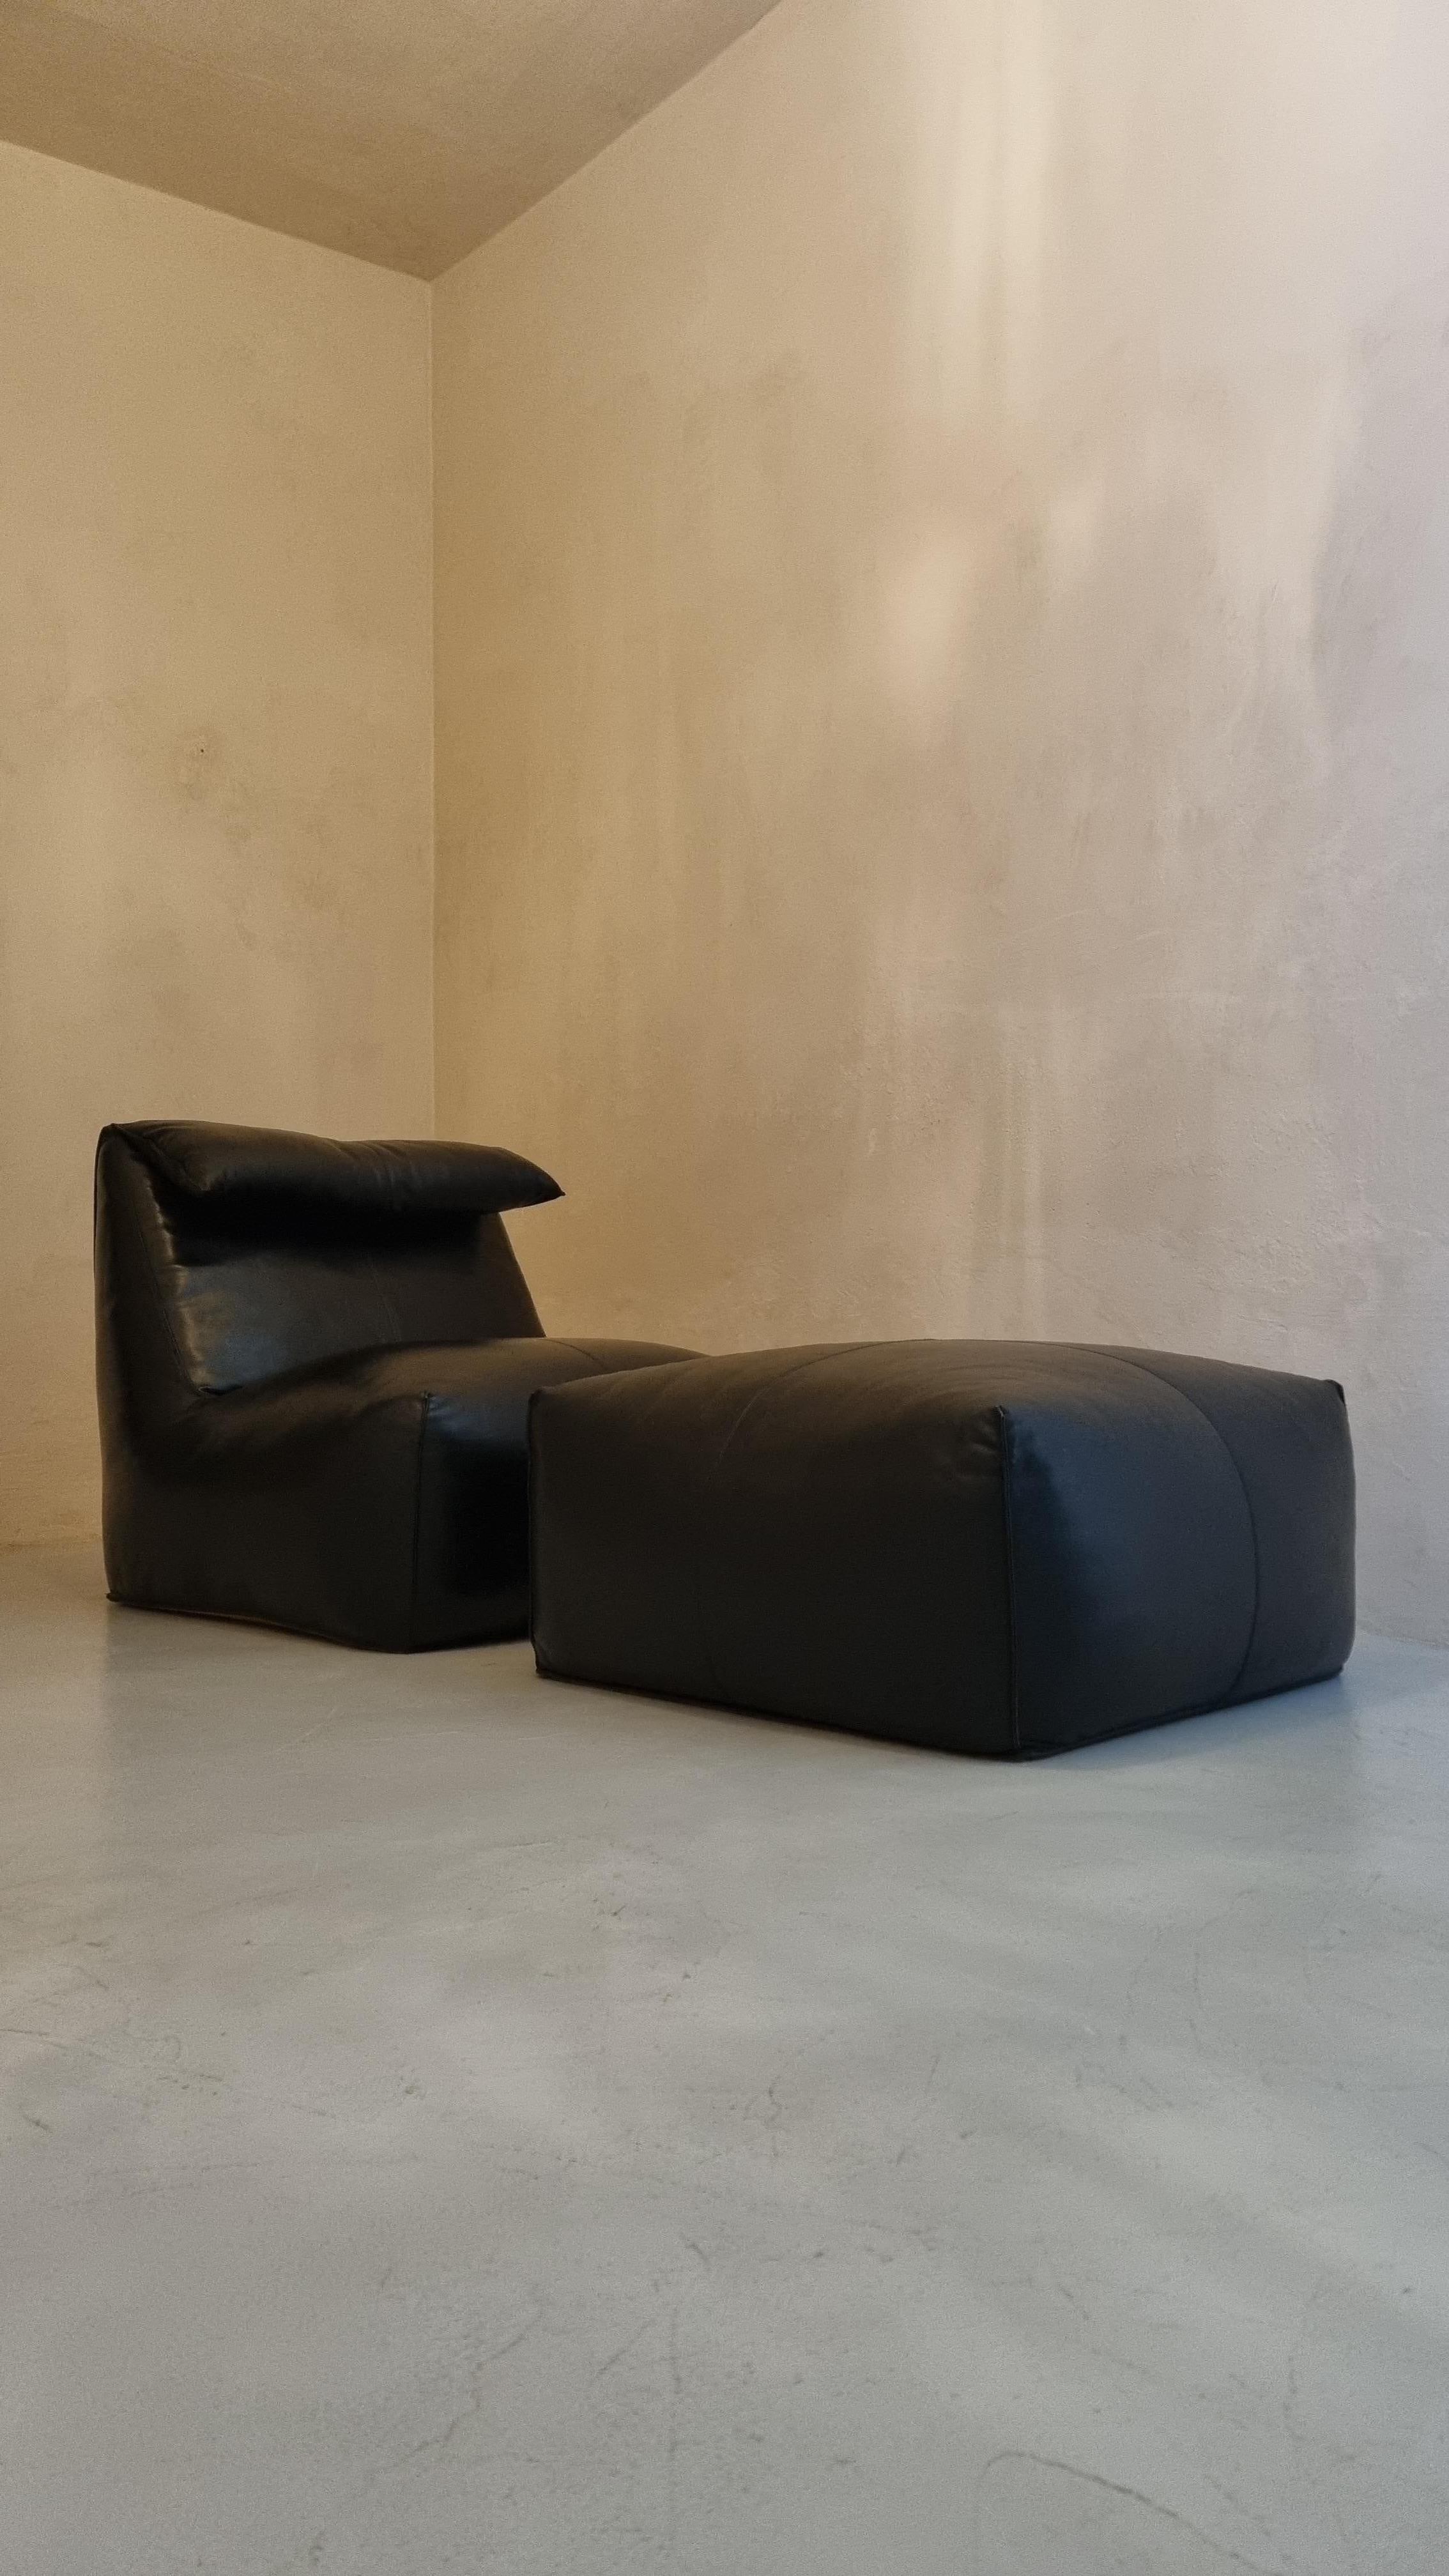 Bamboleuse and Bambouff designed by Mario Bellini for B&B Italia, 1970.
The Bambole series won the Compasso d'Oro award in 1979. 
Le Bambole is an iconic piece of Italian design. included in the permanent collection of the MoMA in New York, Timeless